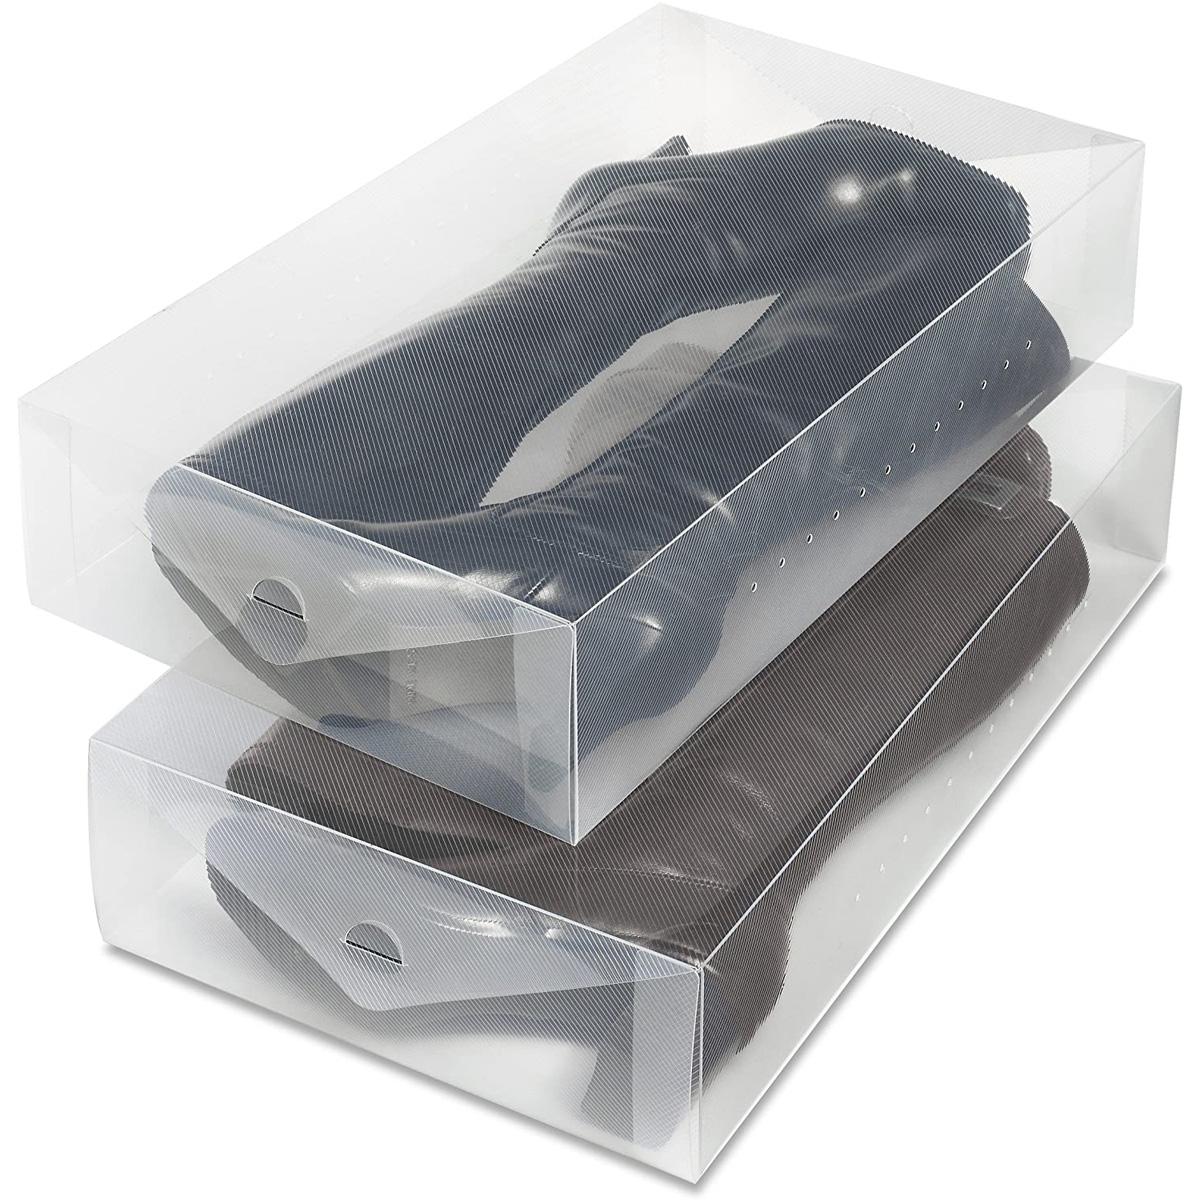 2 Whitmor Clear Vue Heavy Duty Stackable Boot Box for $3.42